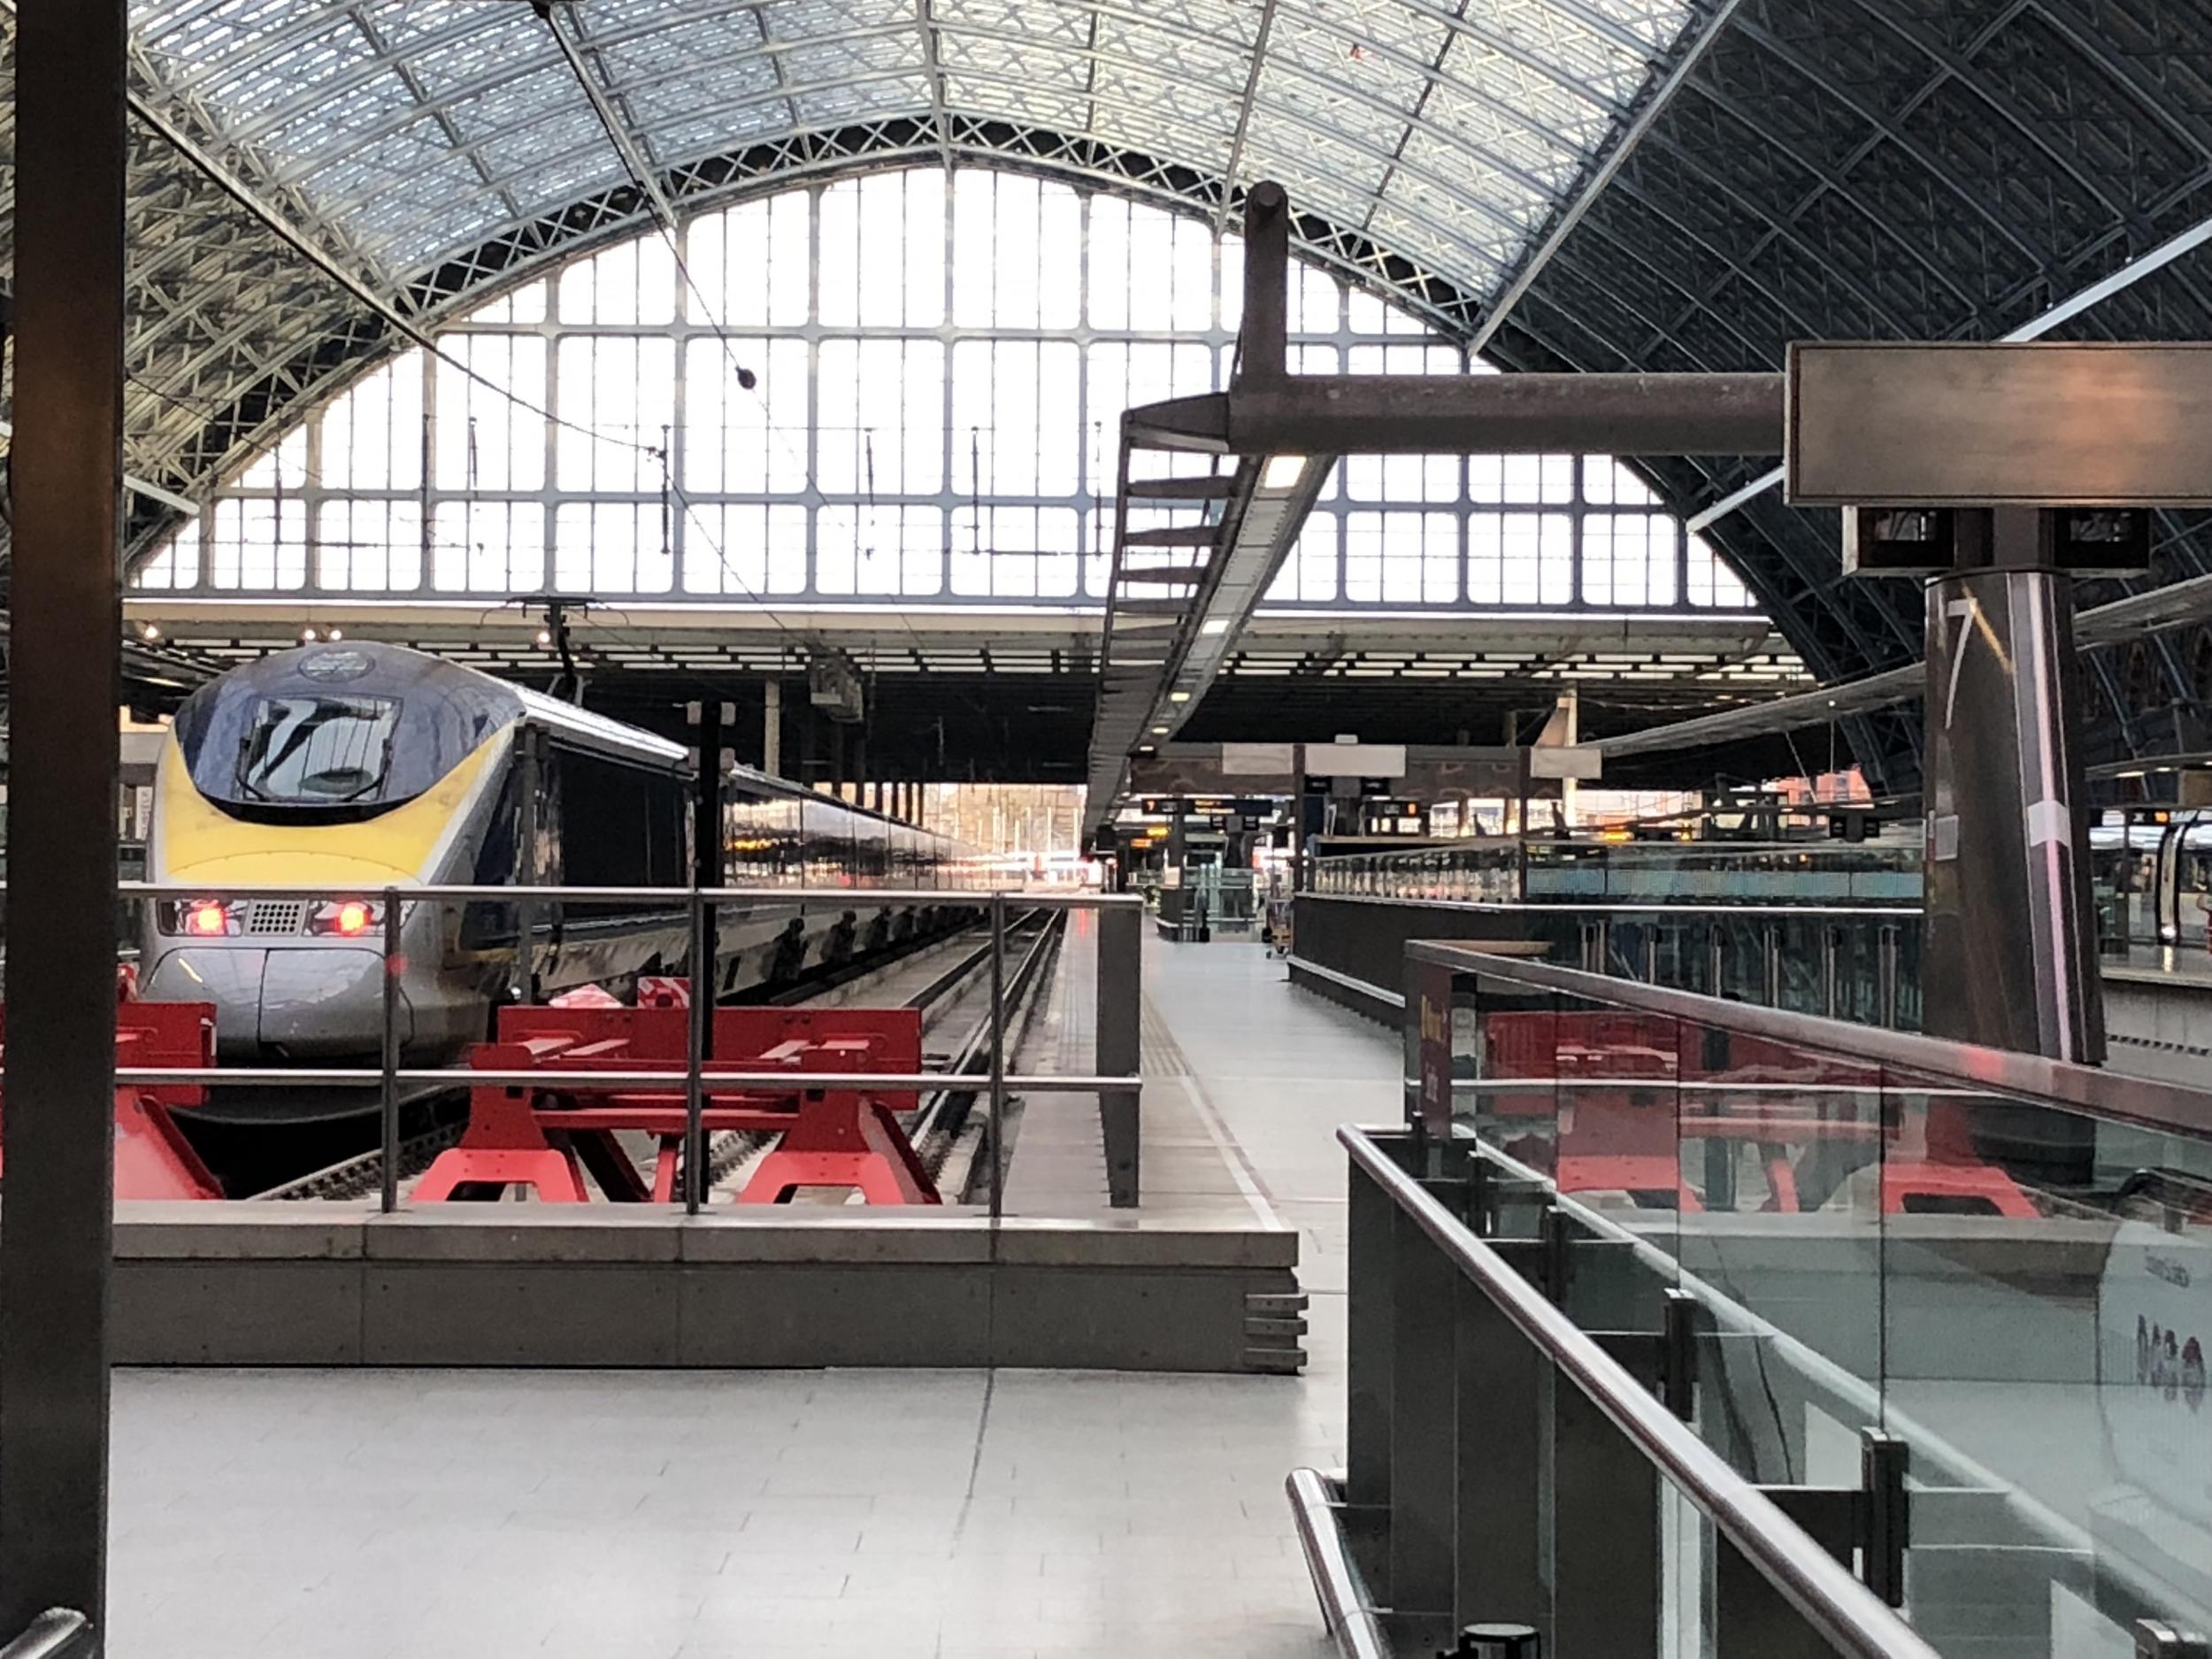 Late notice: Some Eurostar trains between London St Pancras and Paris and Brussels have been cancelled